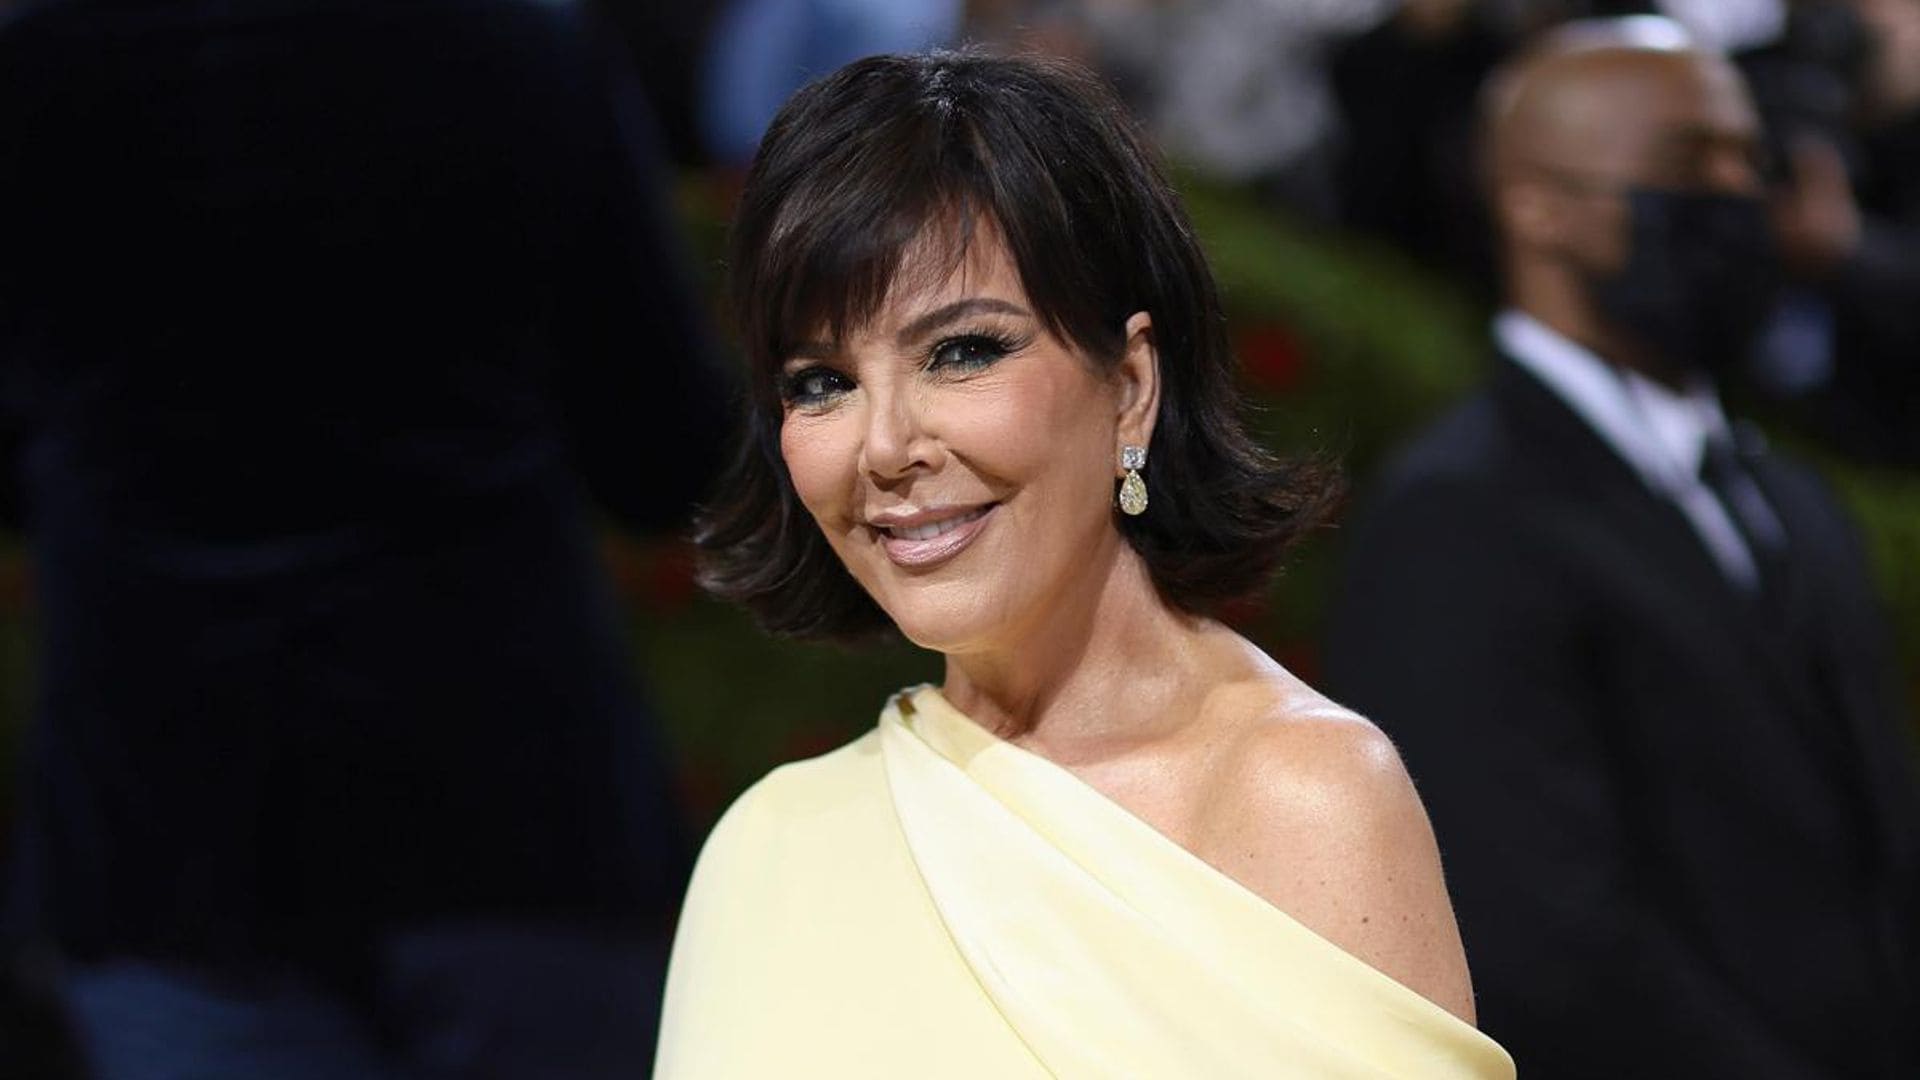 Kris Jenner’s unconventional dying wish includes ashes and jewelry